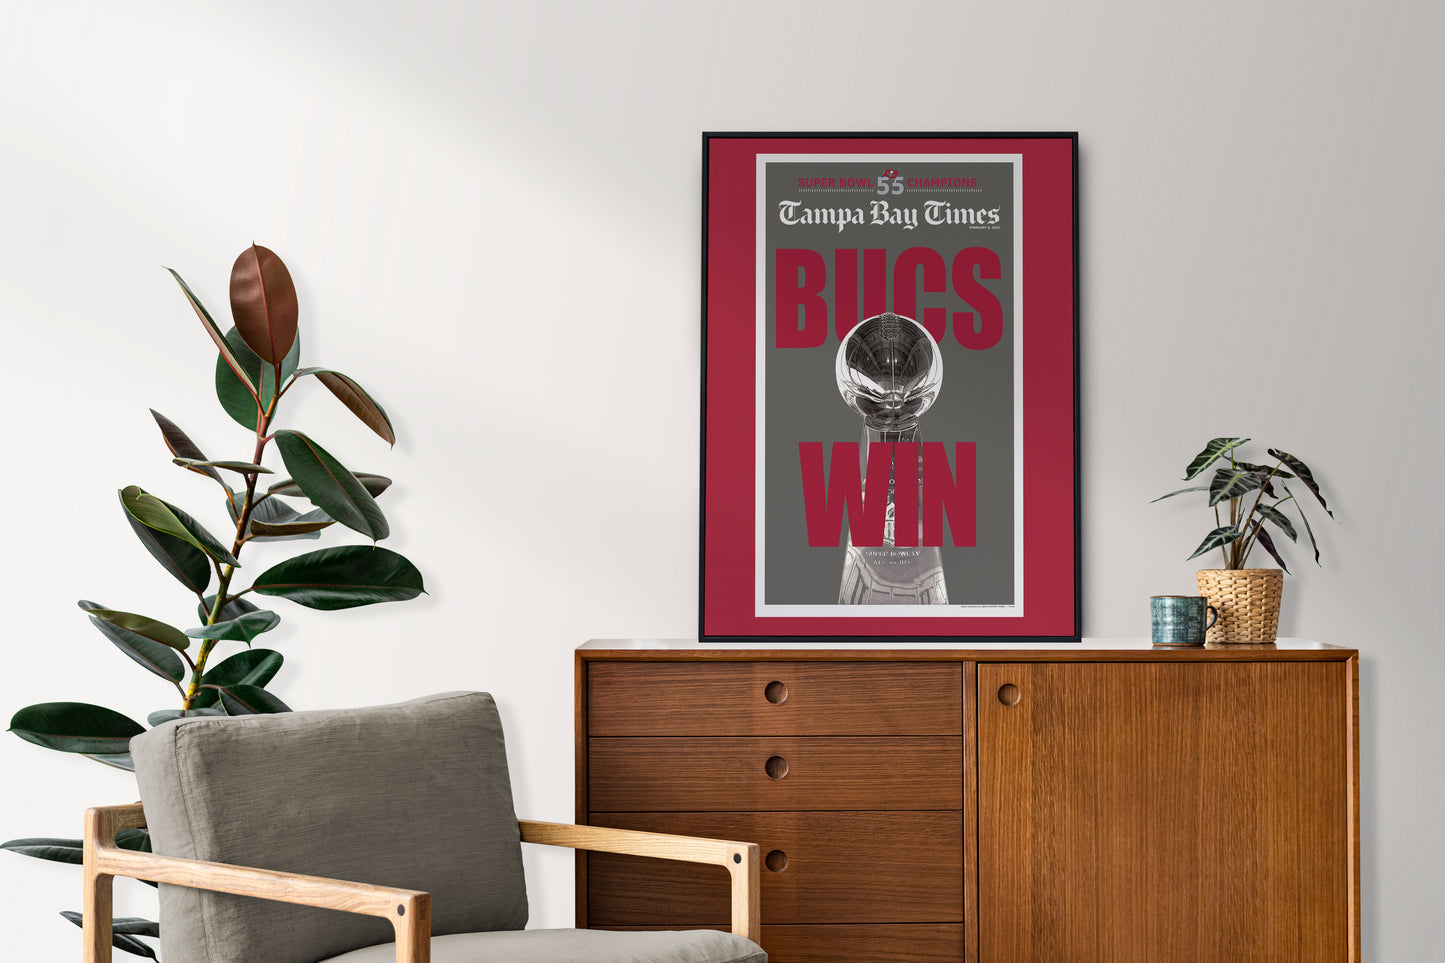 Tampa Bay Buccaneers 2021 Super Bowl NFL Champions Front Cover Tampa Bay Times Newspaper Poster